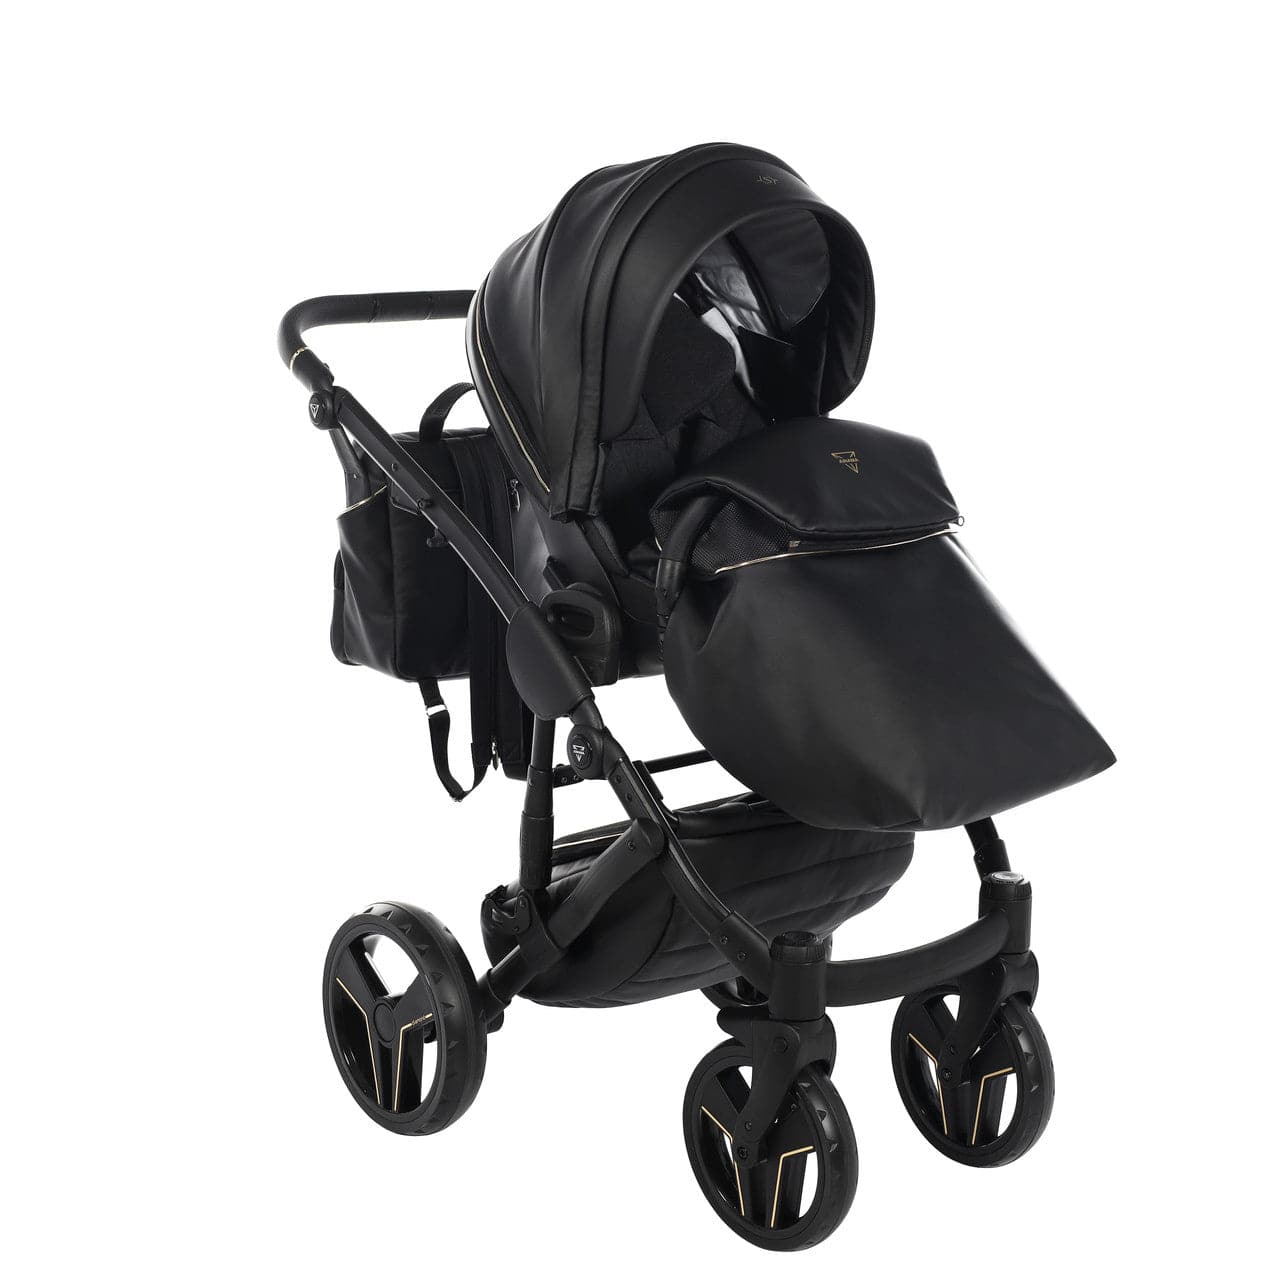 Junama S-Class 3 In 1 Travel System - Black - For Your Little One